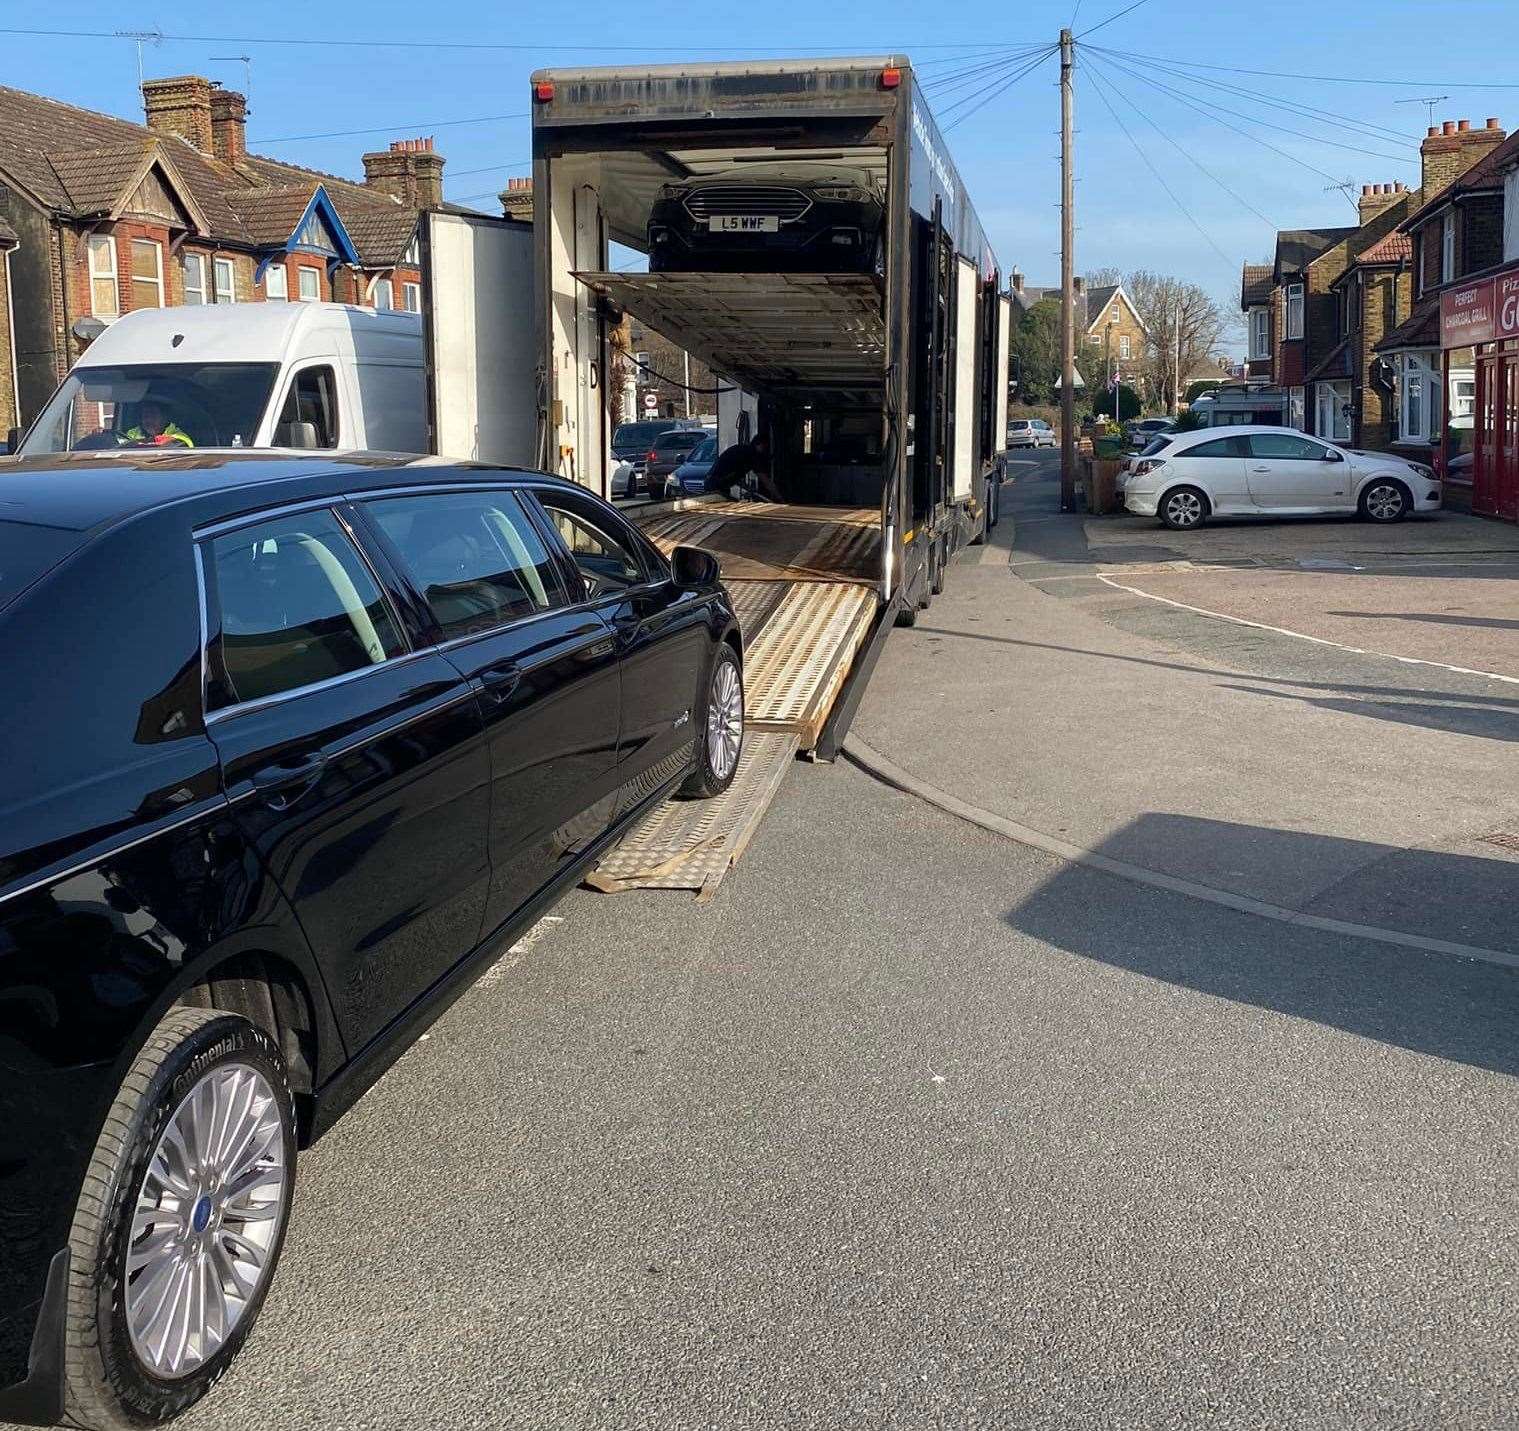 Unloading a new fleet of hybrid limousines and hearse for Sittingbourne firm William Whitmey Funeral Directors